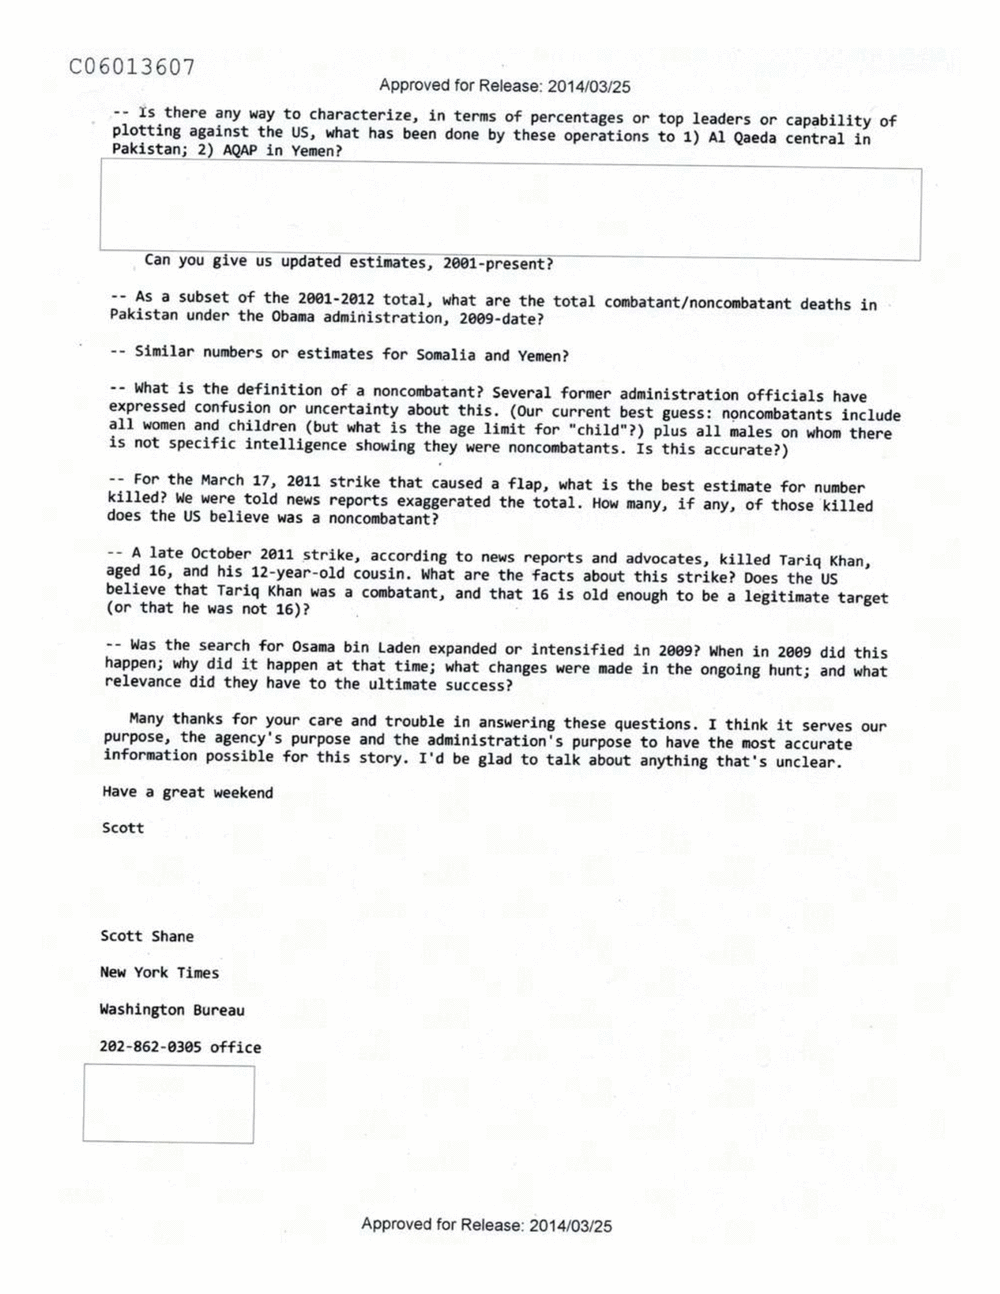 Page 418 from Email Correspondence Between Reporters and CIA Flacks